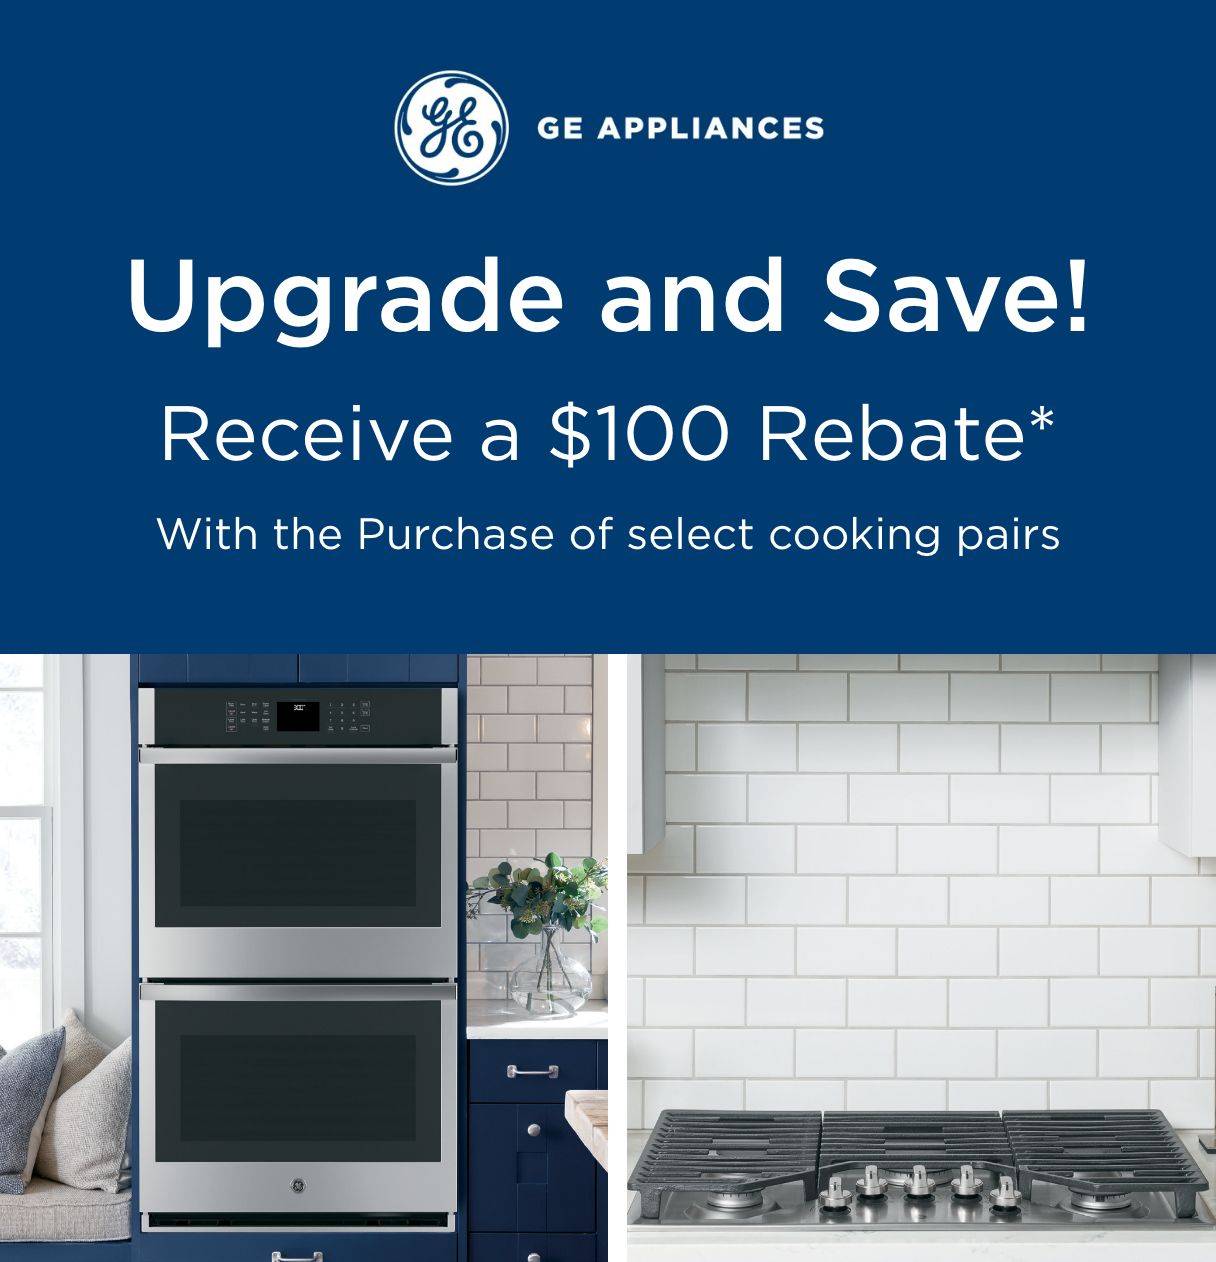 Upgrade and Save - Receive a $100 Rebate with the purchase of select cooking pairs